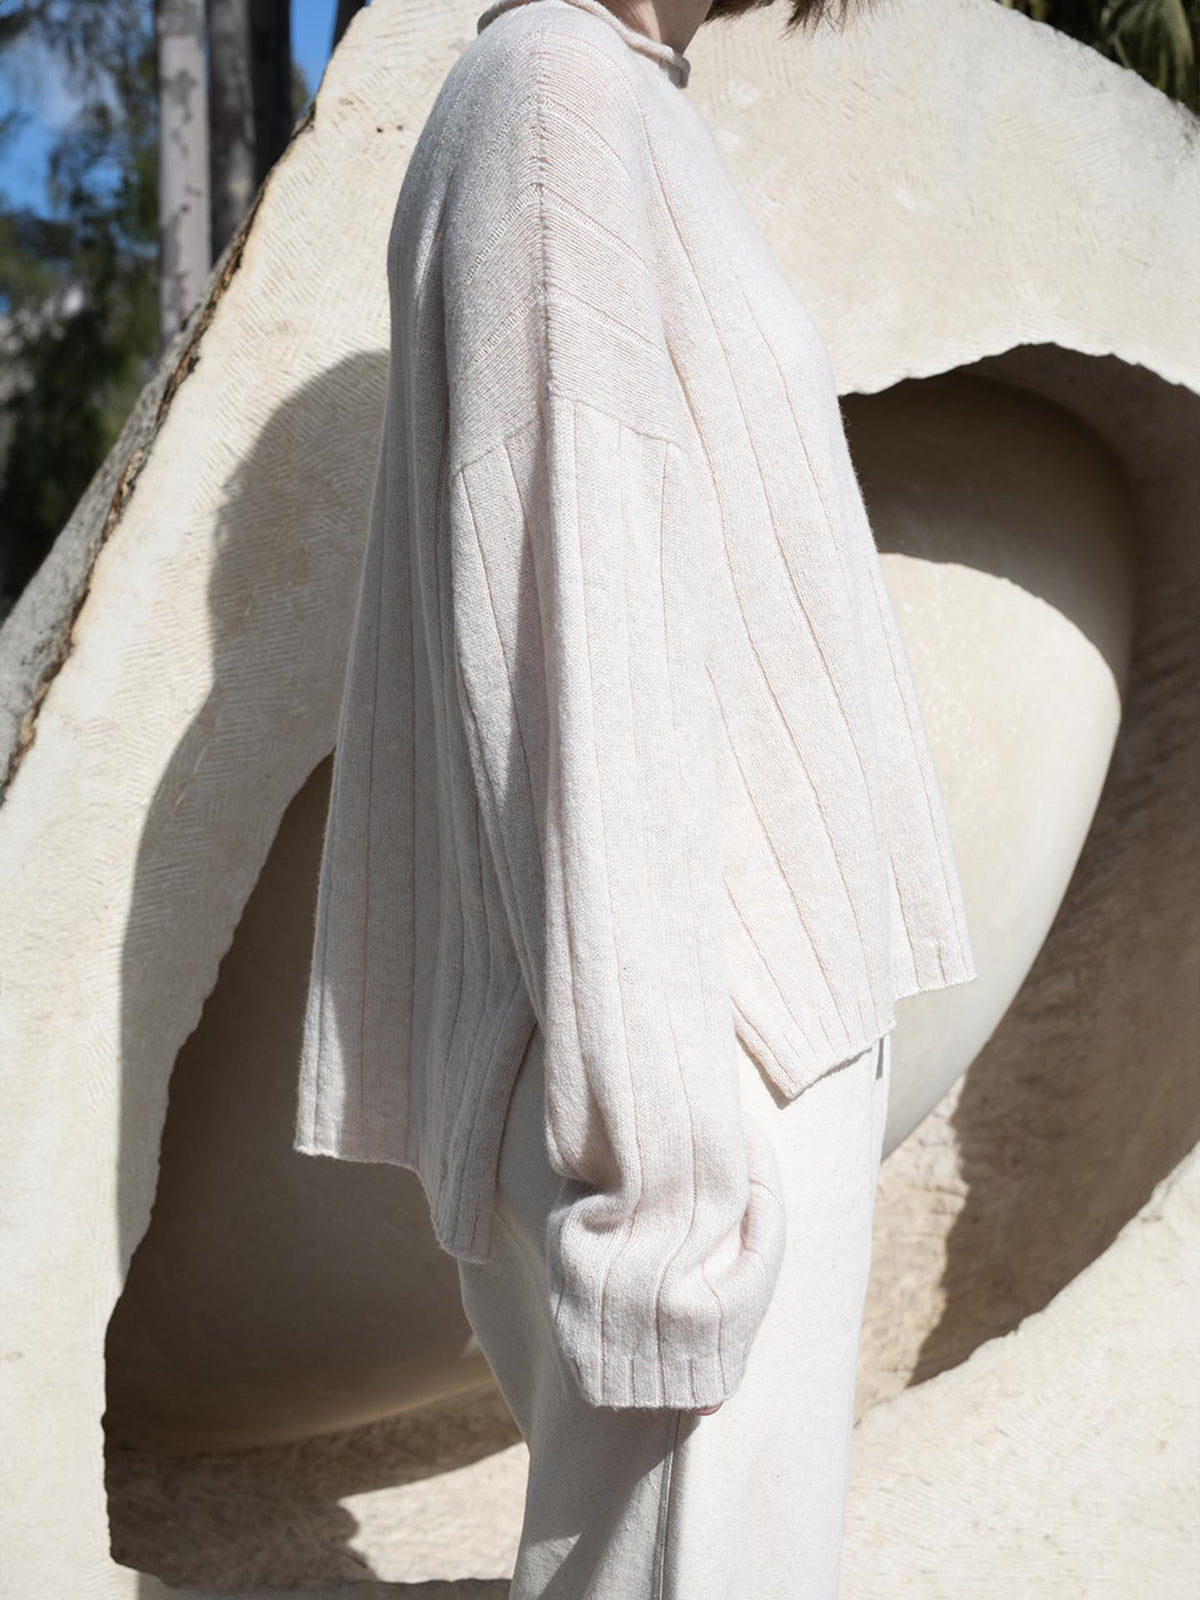 A woman wearing an oversized white sweater and pants, ethically knitted from Italian air-spun merino, in front of a sculpture.